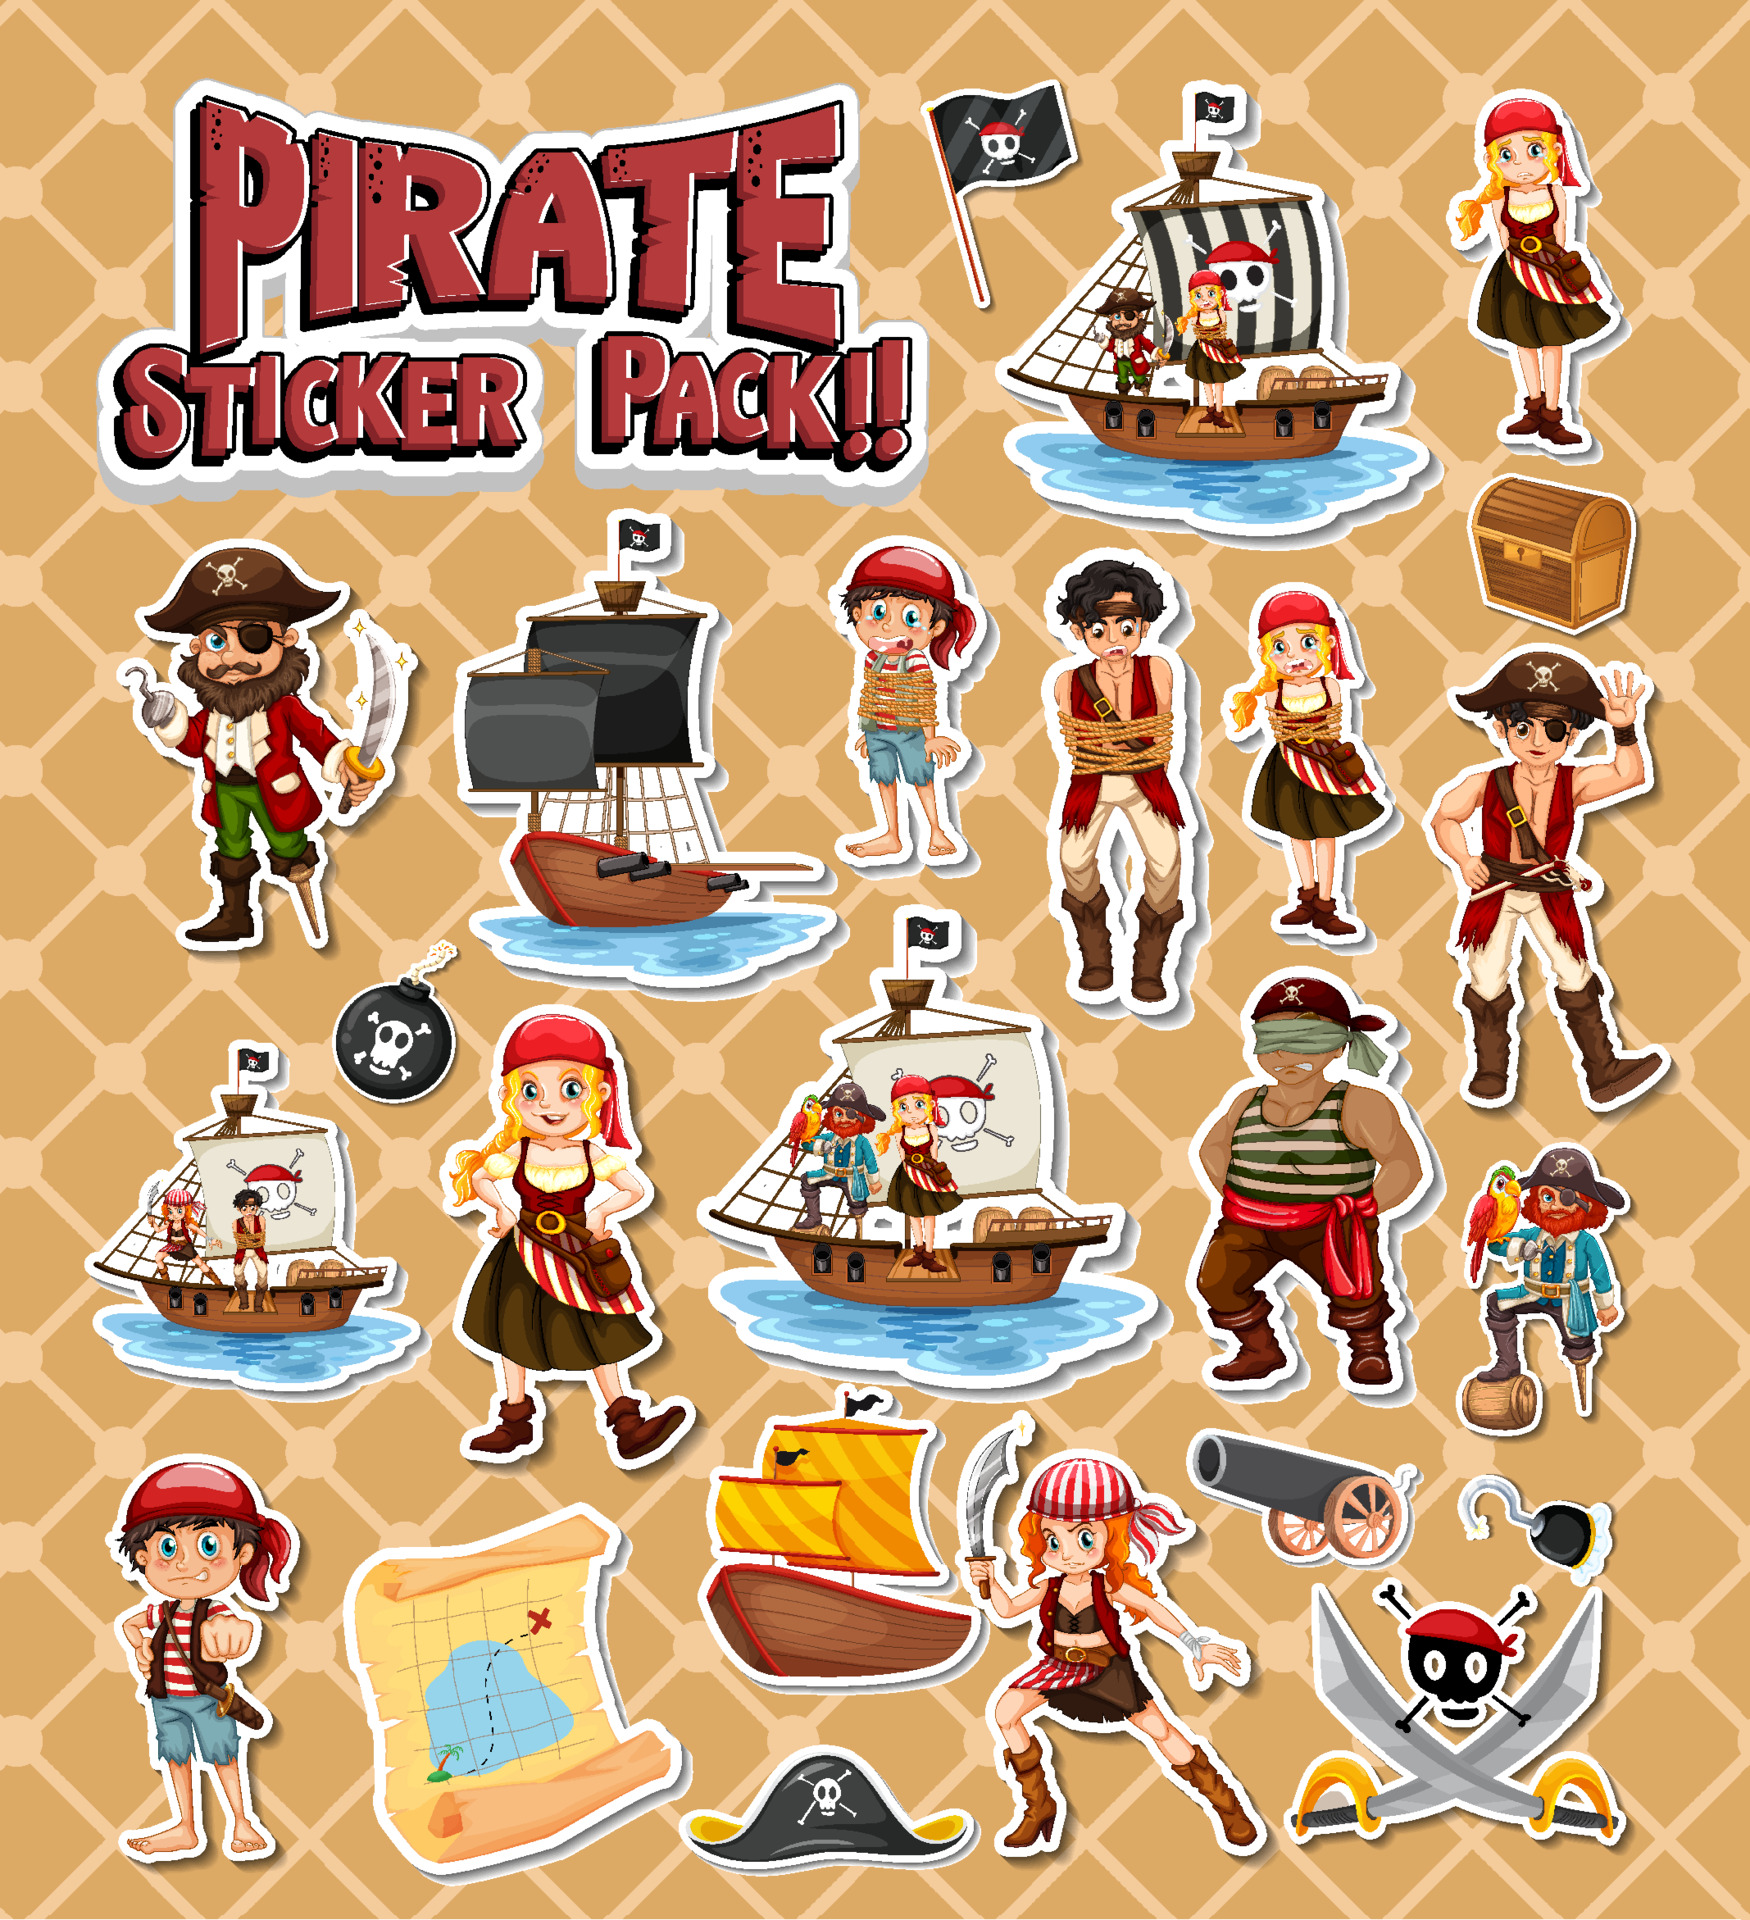 https://static.vecteezy.com/system/resources/previews/003/601/545/original/pirate-sticker-pack-set-with-cartoon-character-isolated-free-vector.jpg